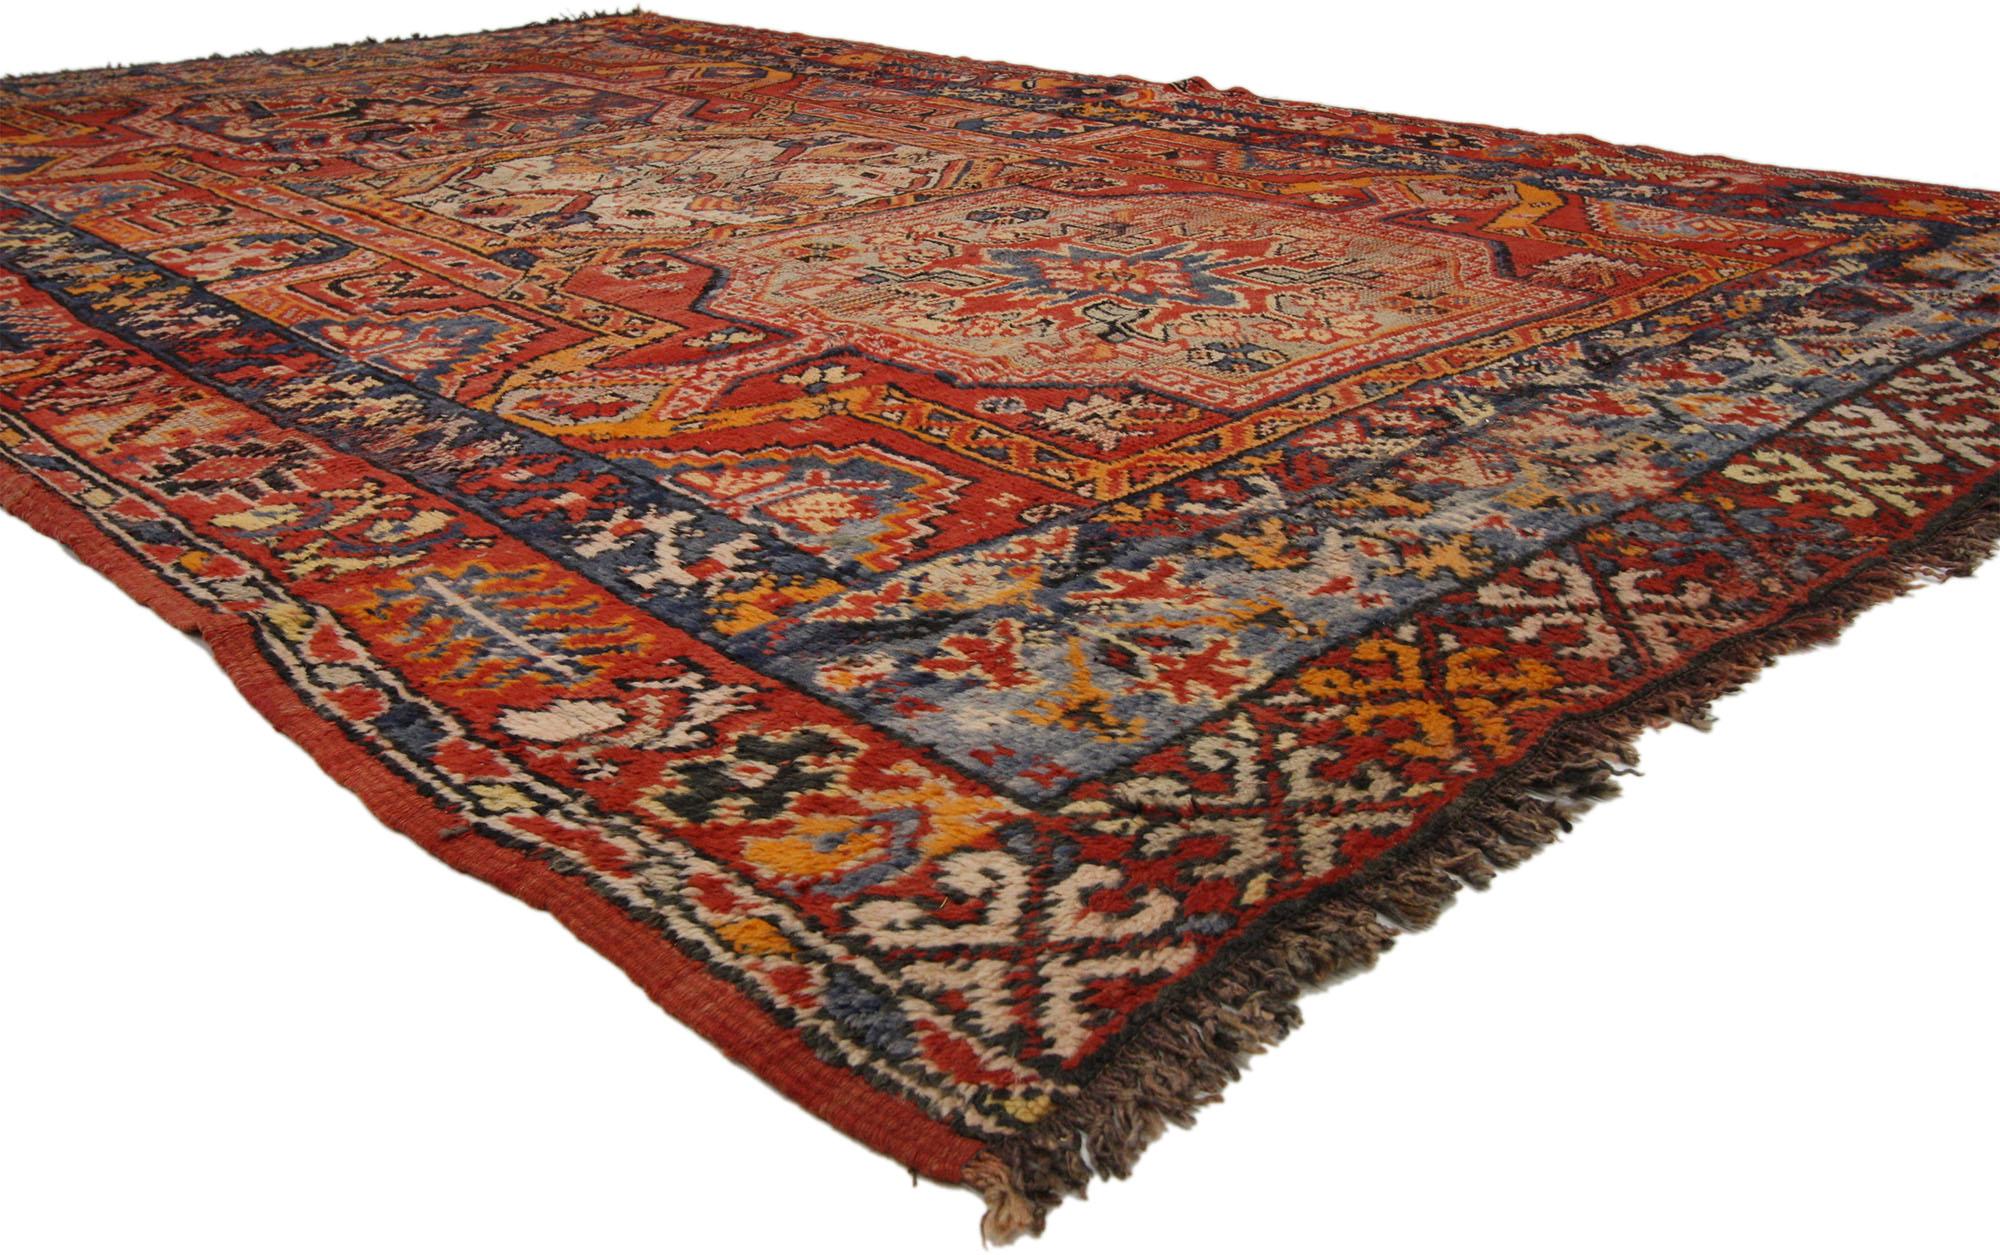 74925 vintage Turkish Oushak rug. This hand-knotted wool vintage Turkish Oushak rug with modern tribal style features three medallions each filled with stylized flowers and tribal motifs surrounded by an all-over pattern of geometric designs on a